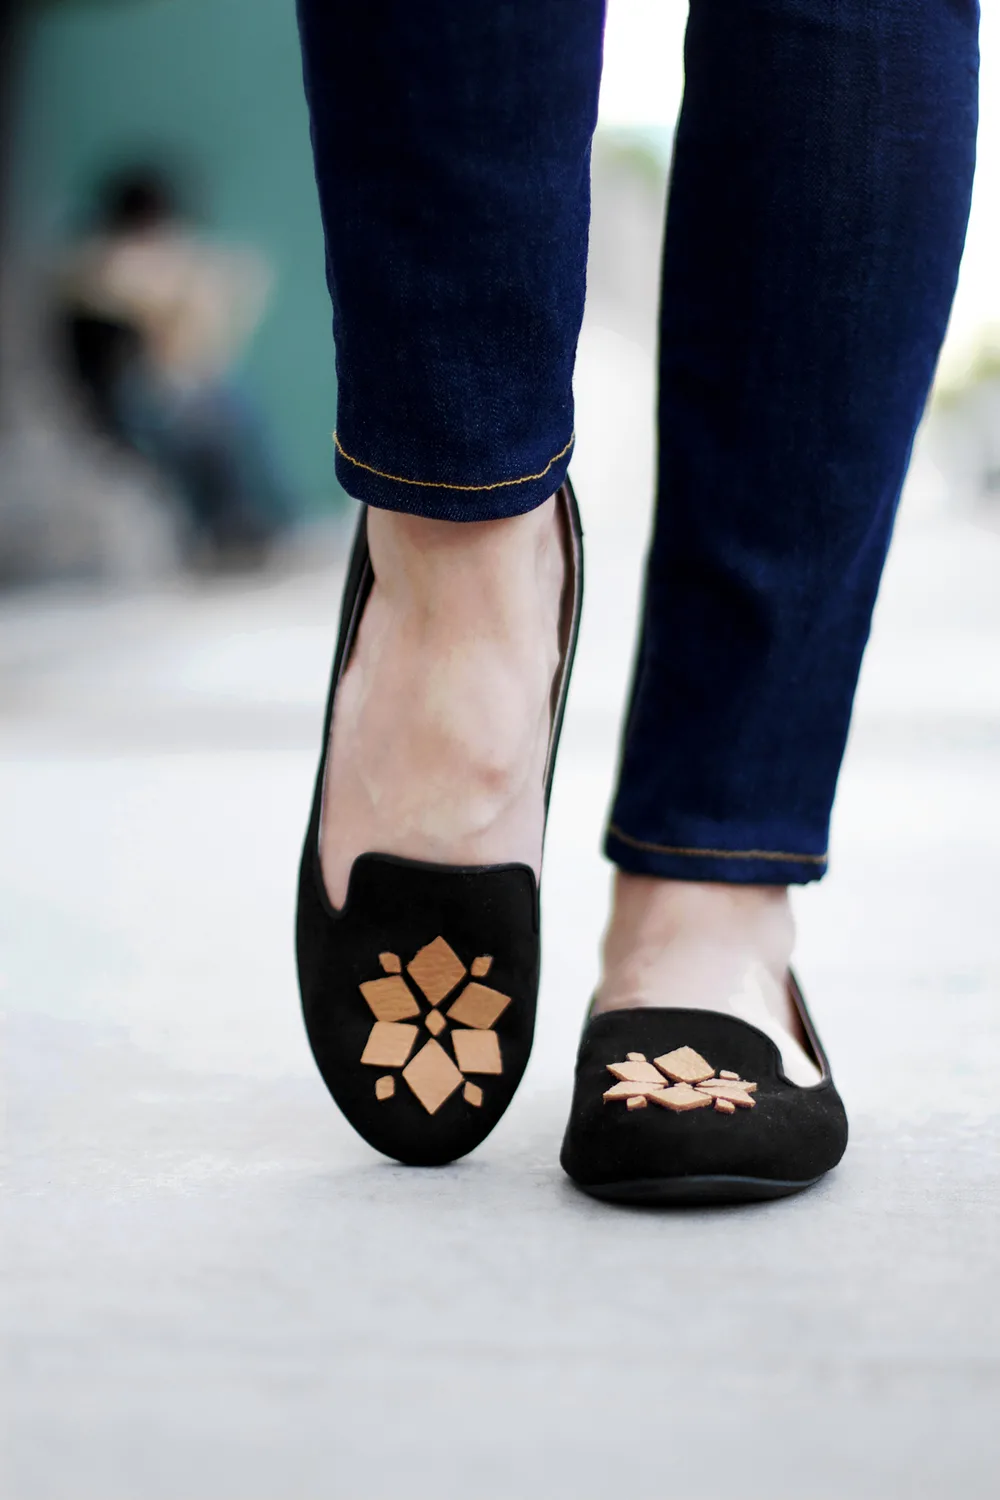 loafers with leather embellishment made with Cricut